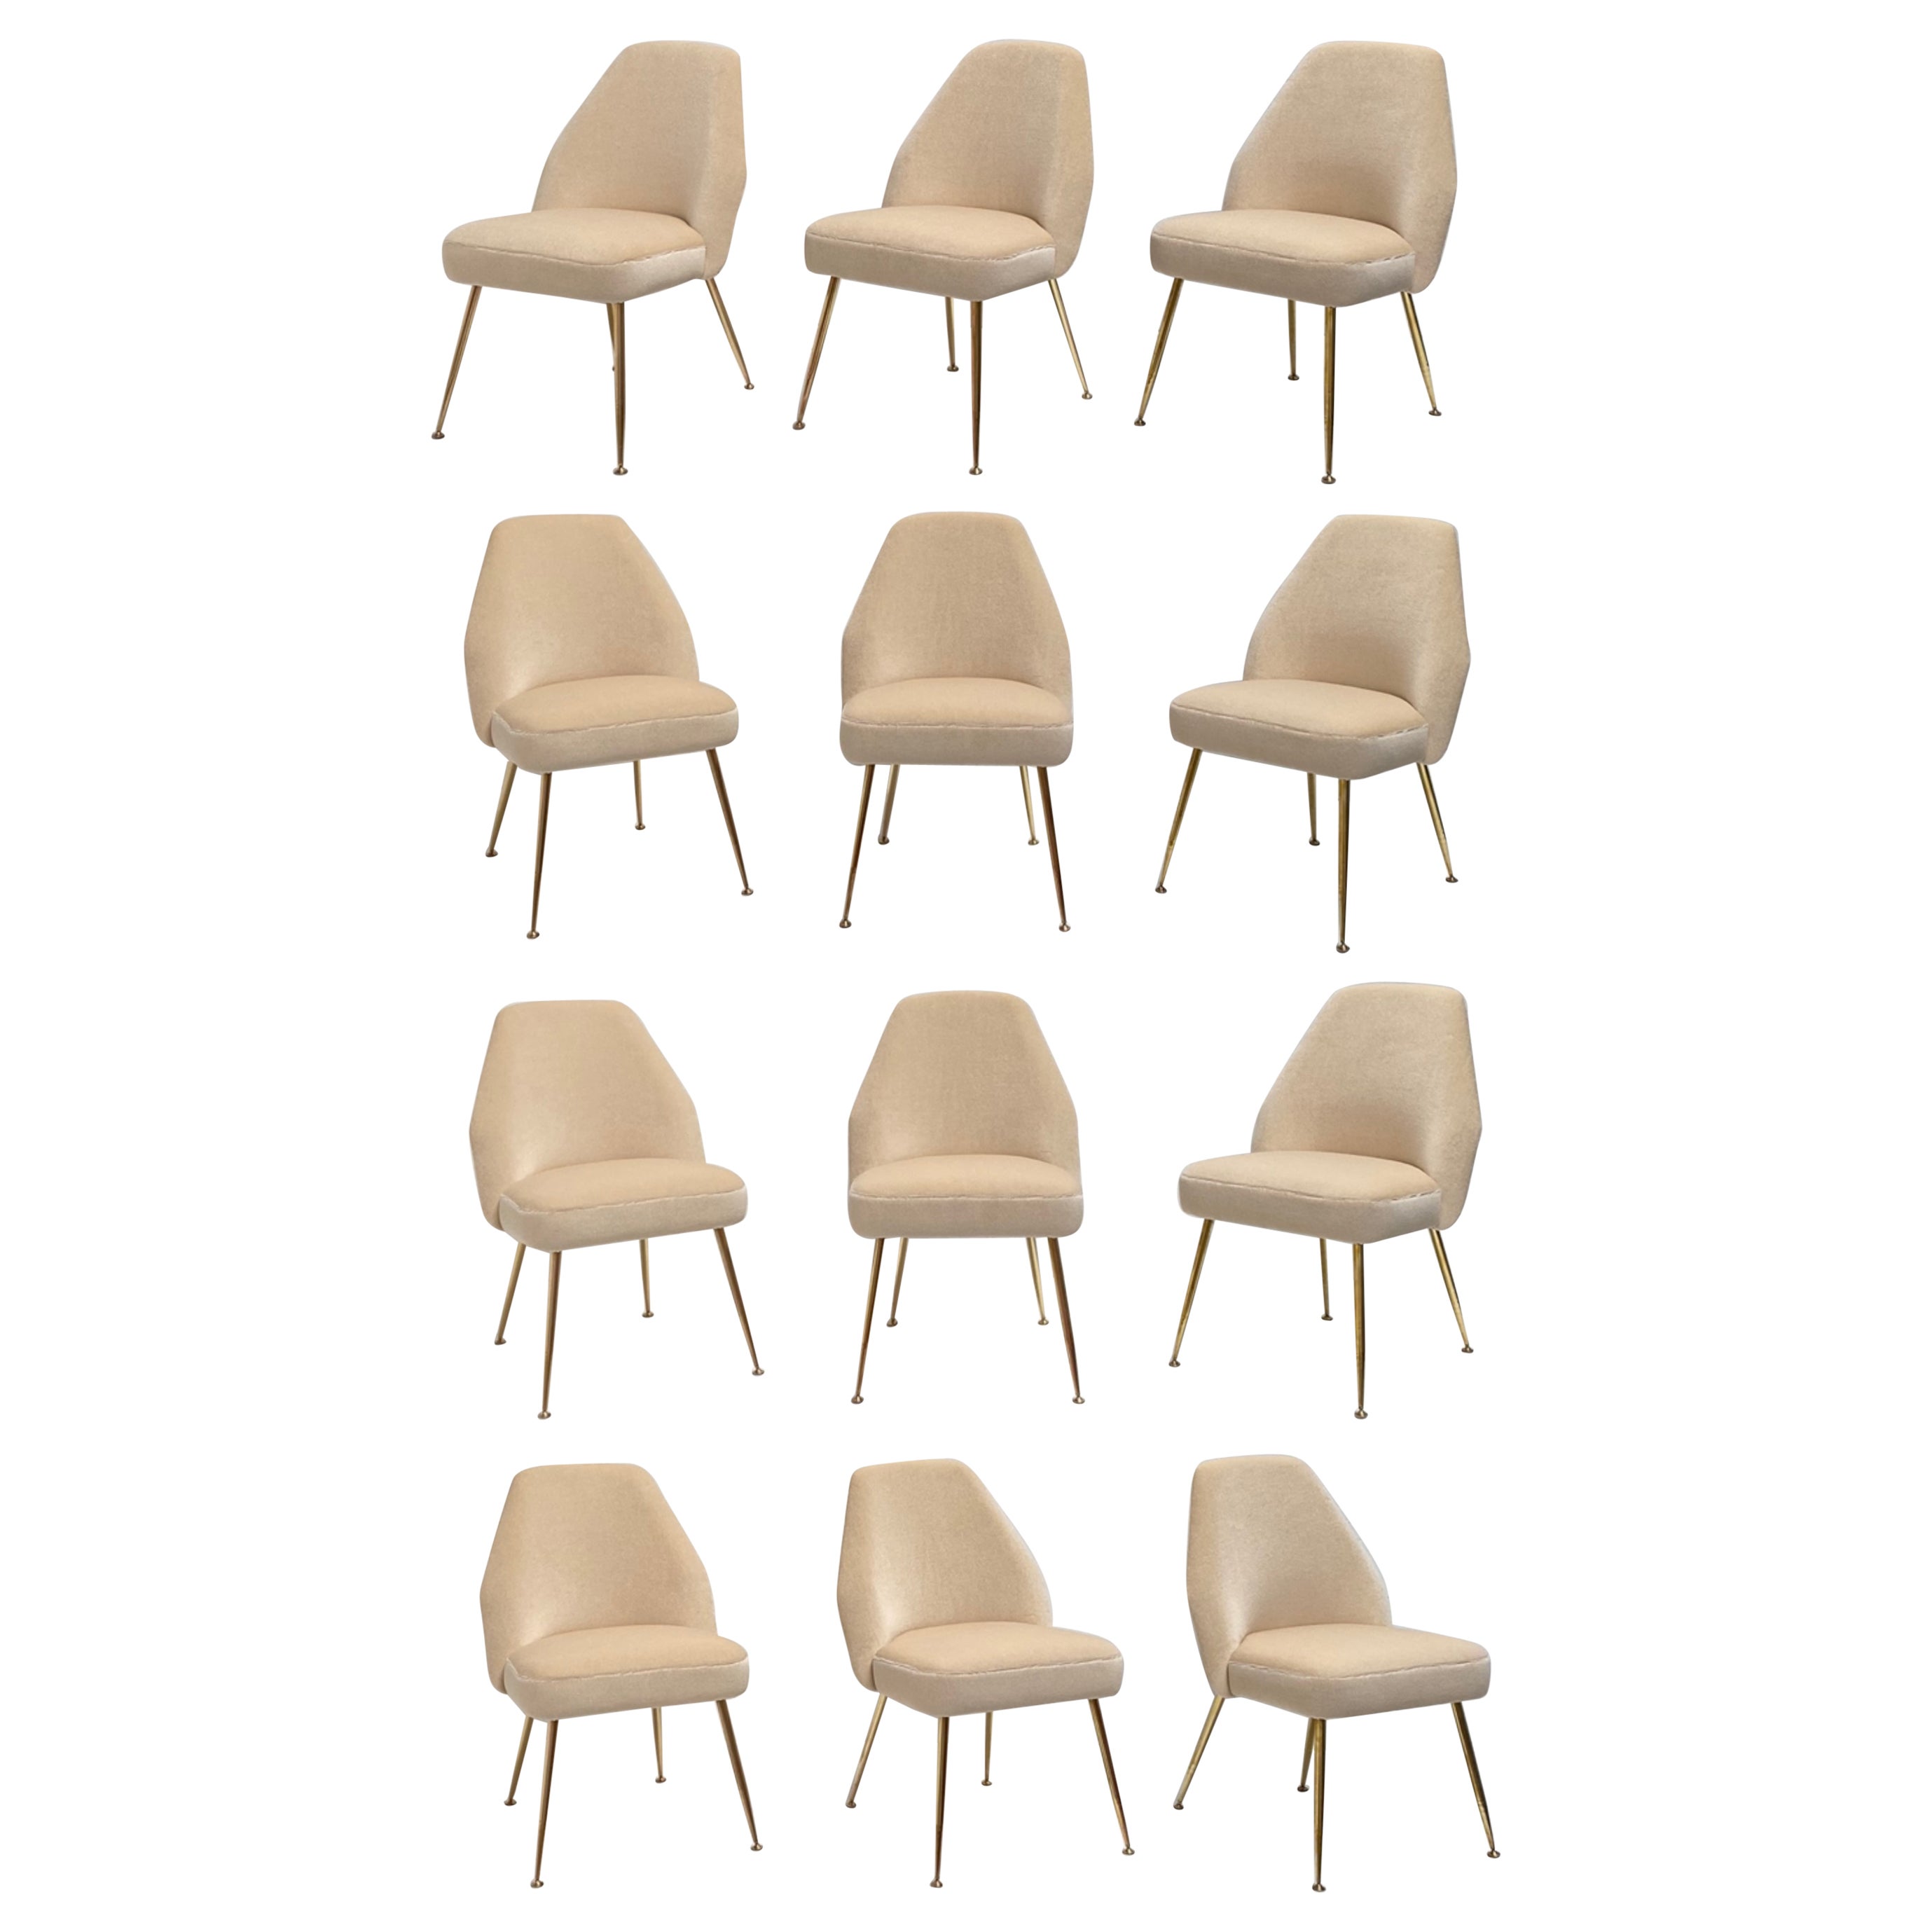 12 Brass & Mohair Campanula Chairs by Pagani (Partner of Gio Ponti) Arflex 1952  For Sale